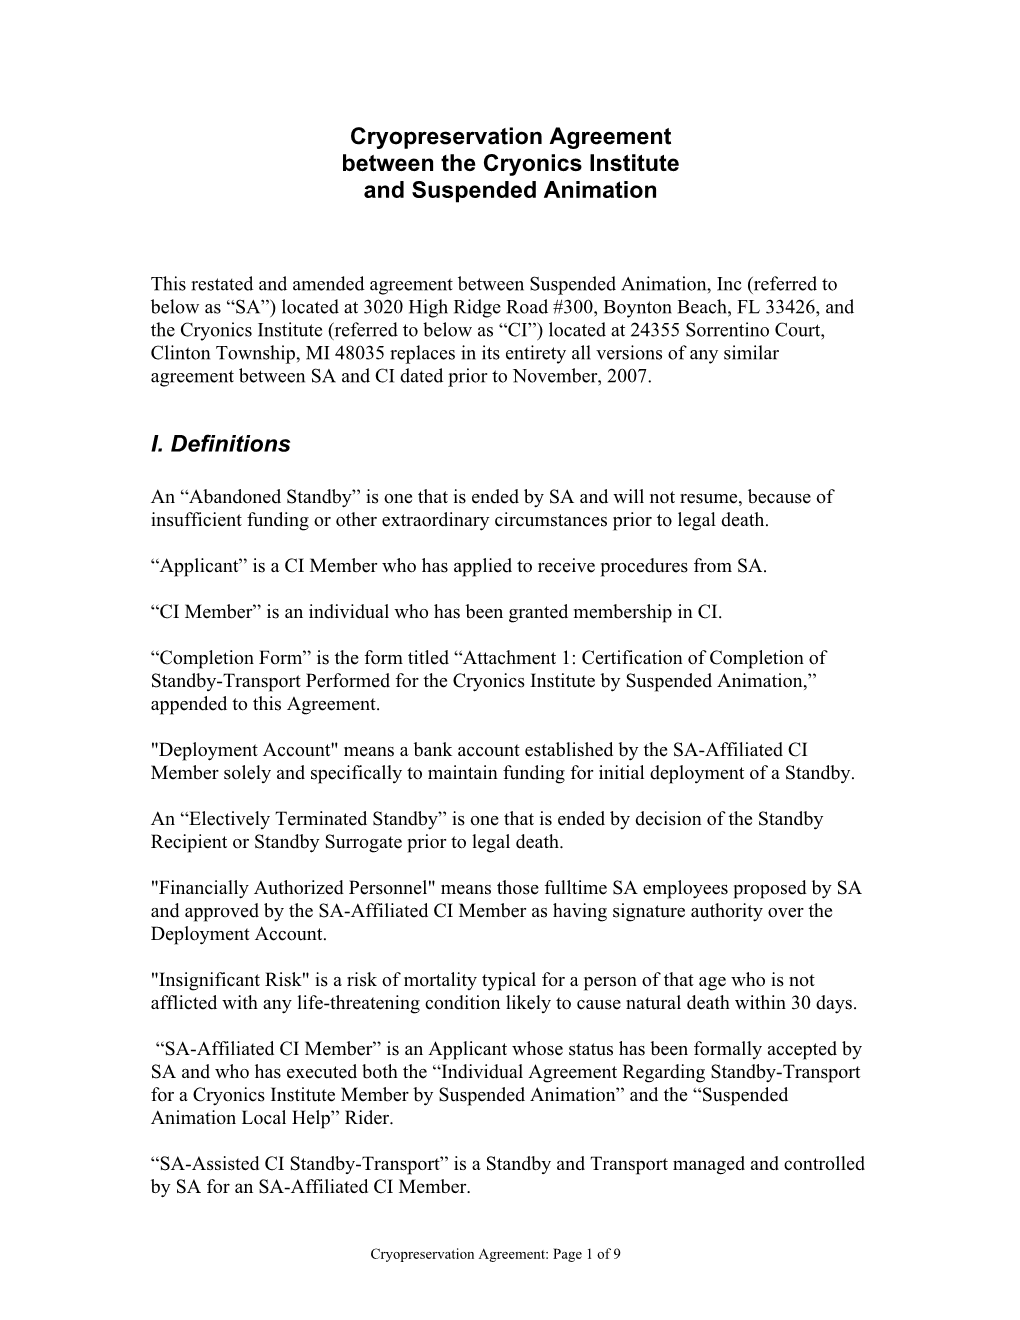 Cryopreservation Service Agreement Between the Cryonics Institute and Suspended Animation